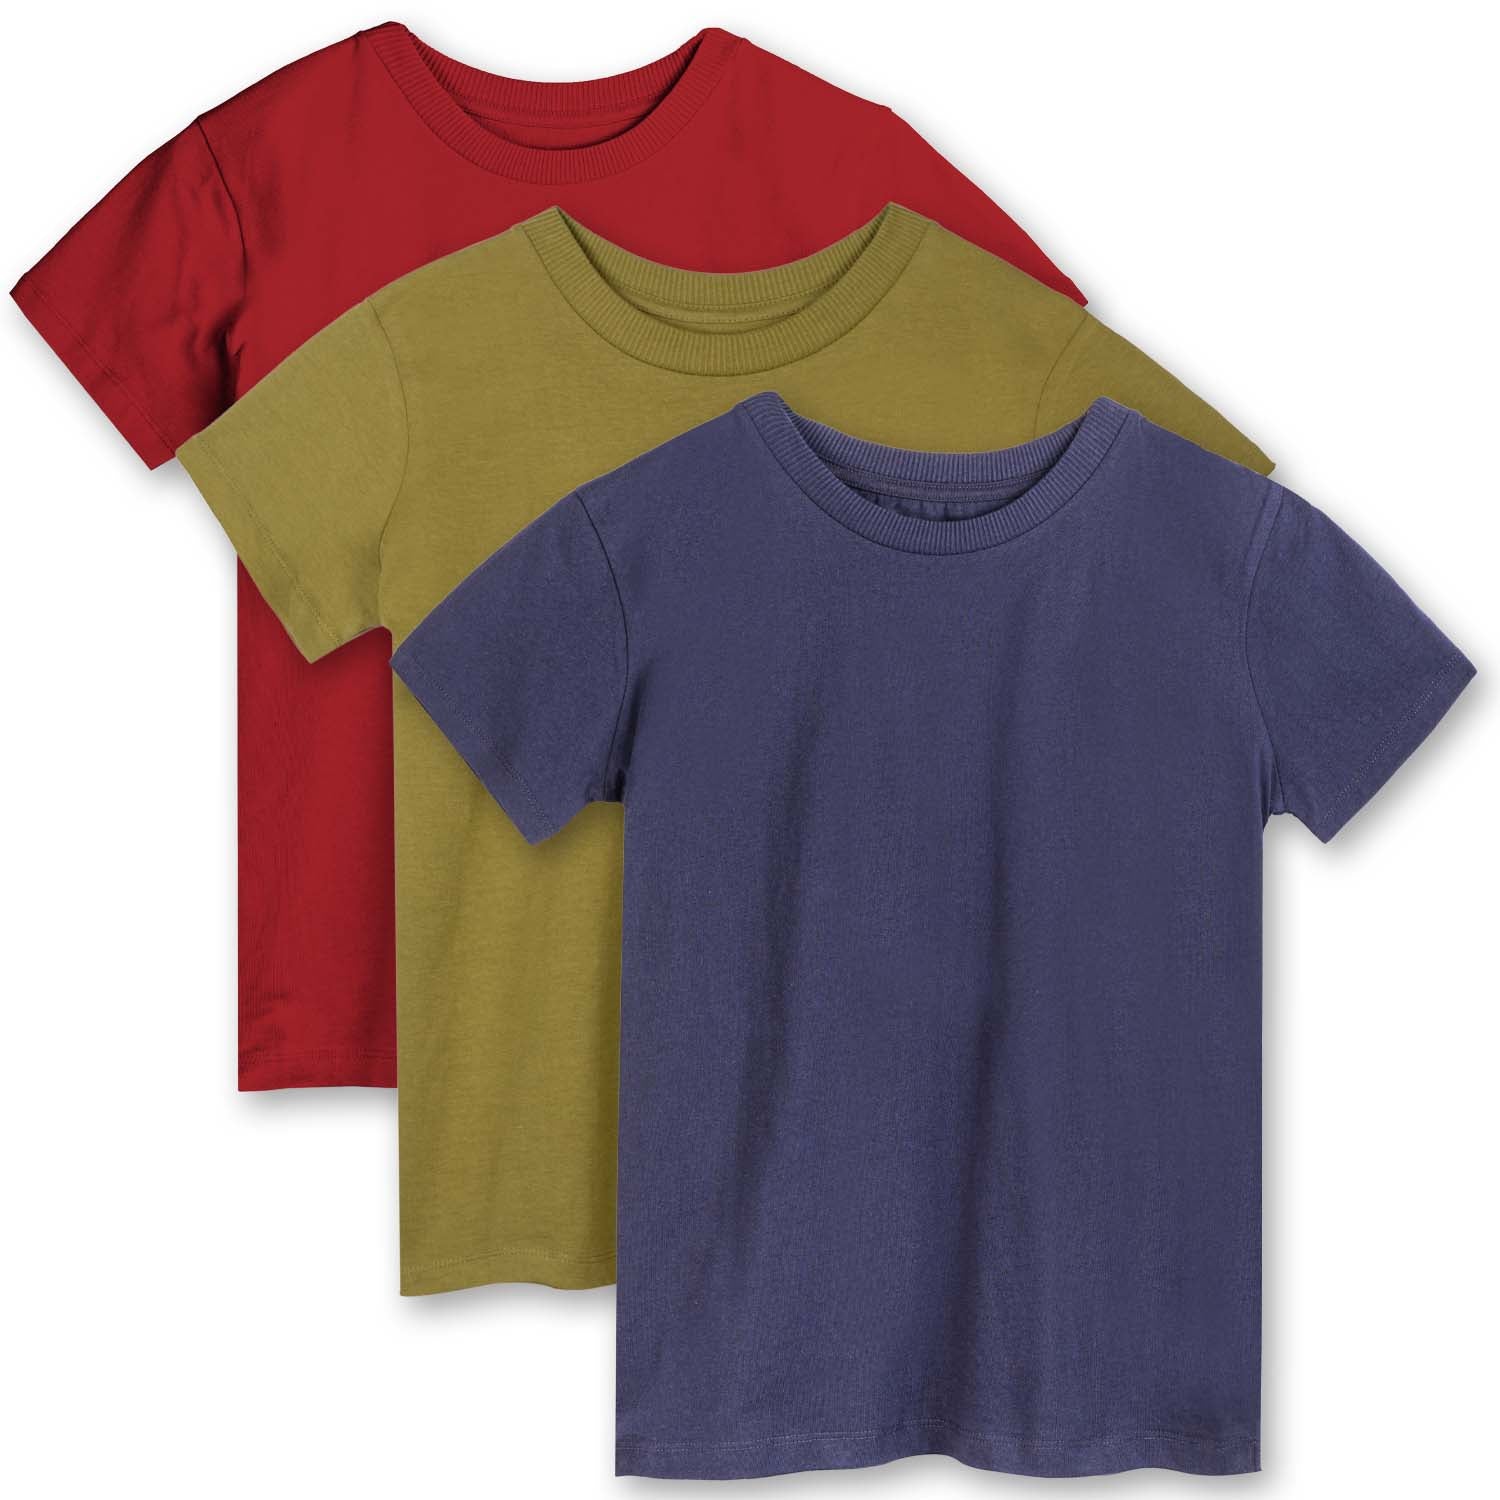 Organic Cotton Kids Shirts - Pack T-Shirts 3 Extended Length Mightly 